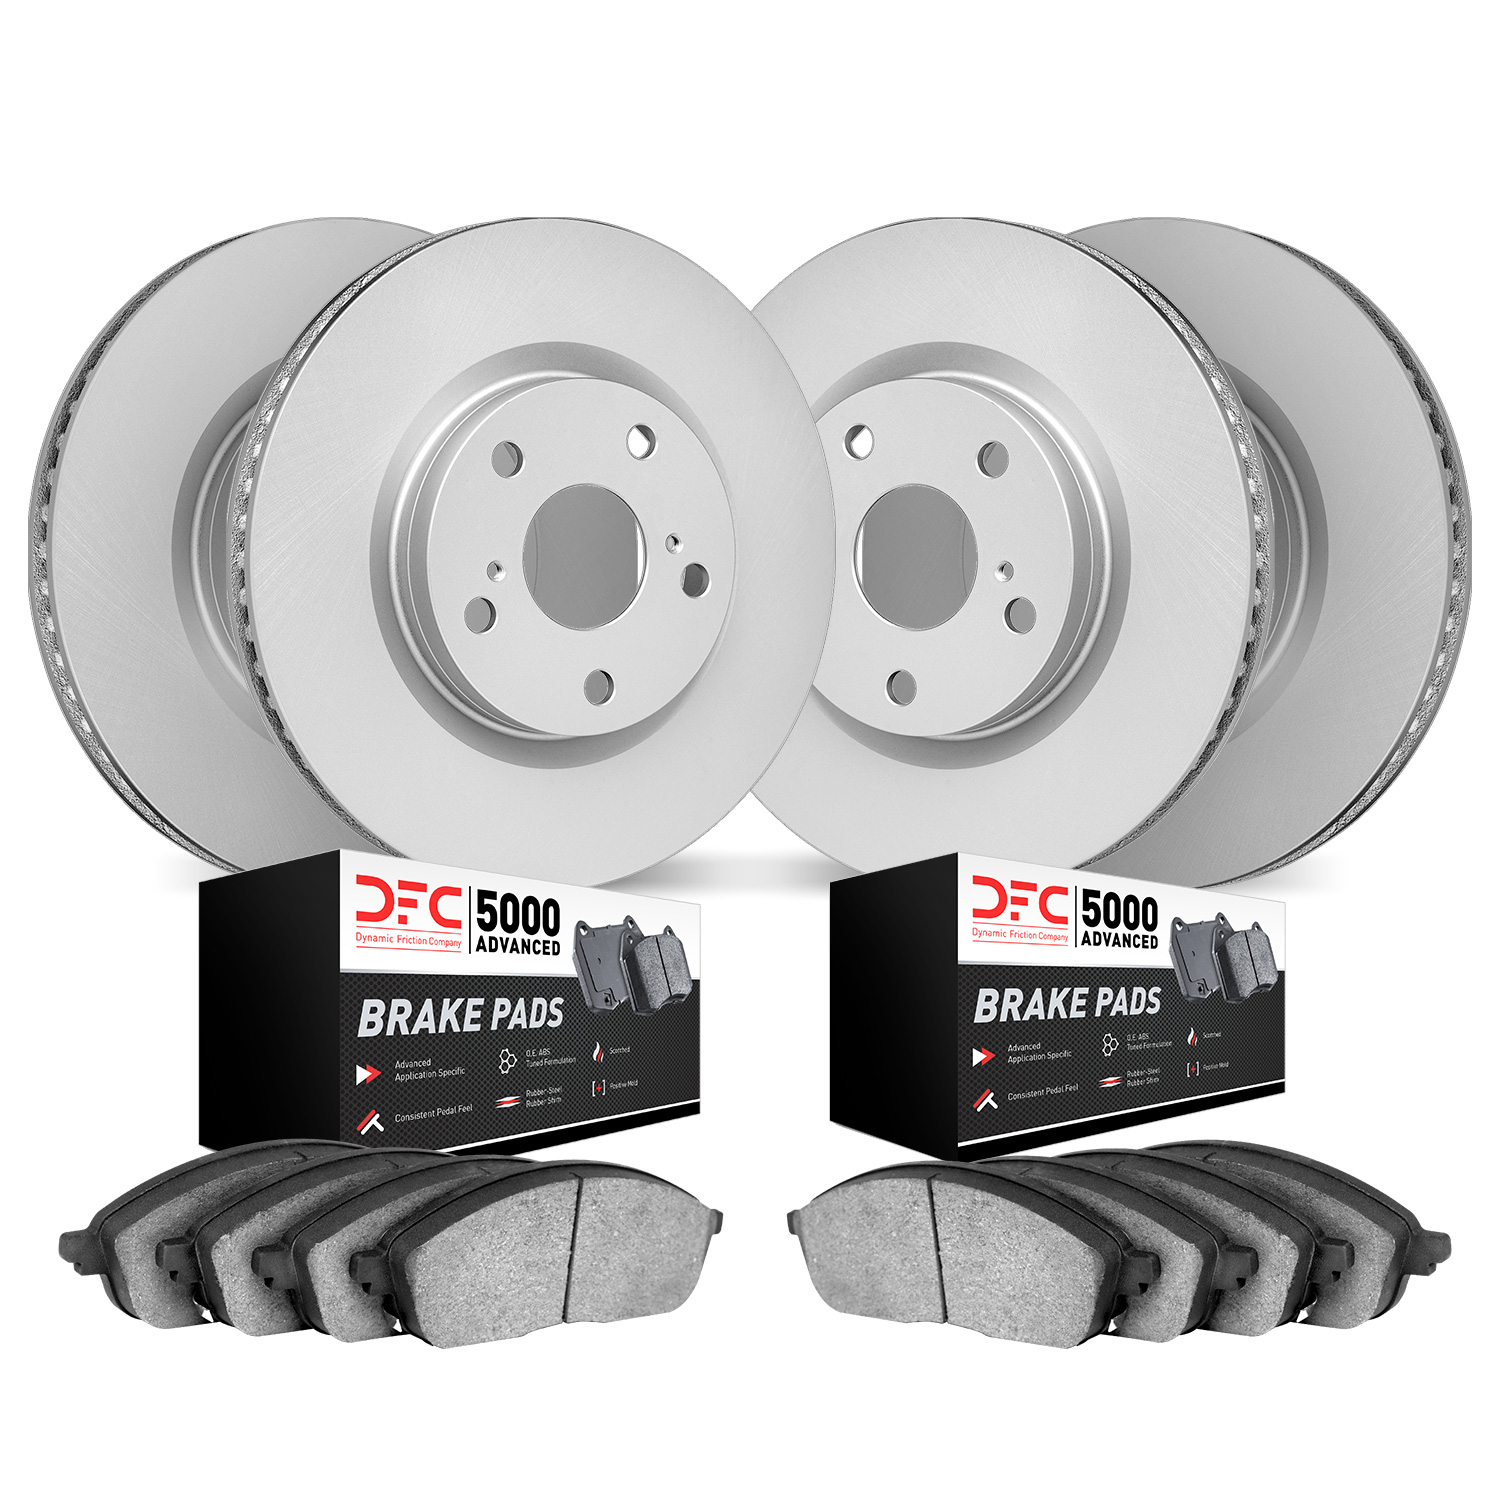 4504-46034 Geospec Brake Rotors w/5000 Advanced Brake Pads Kit, 1997-2009 GM, Position: Front and Rear